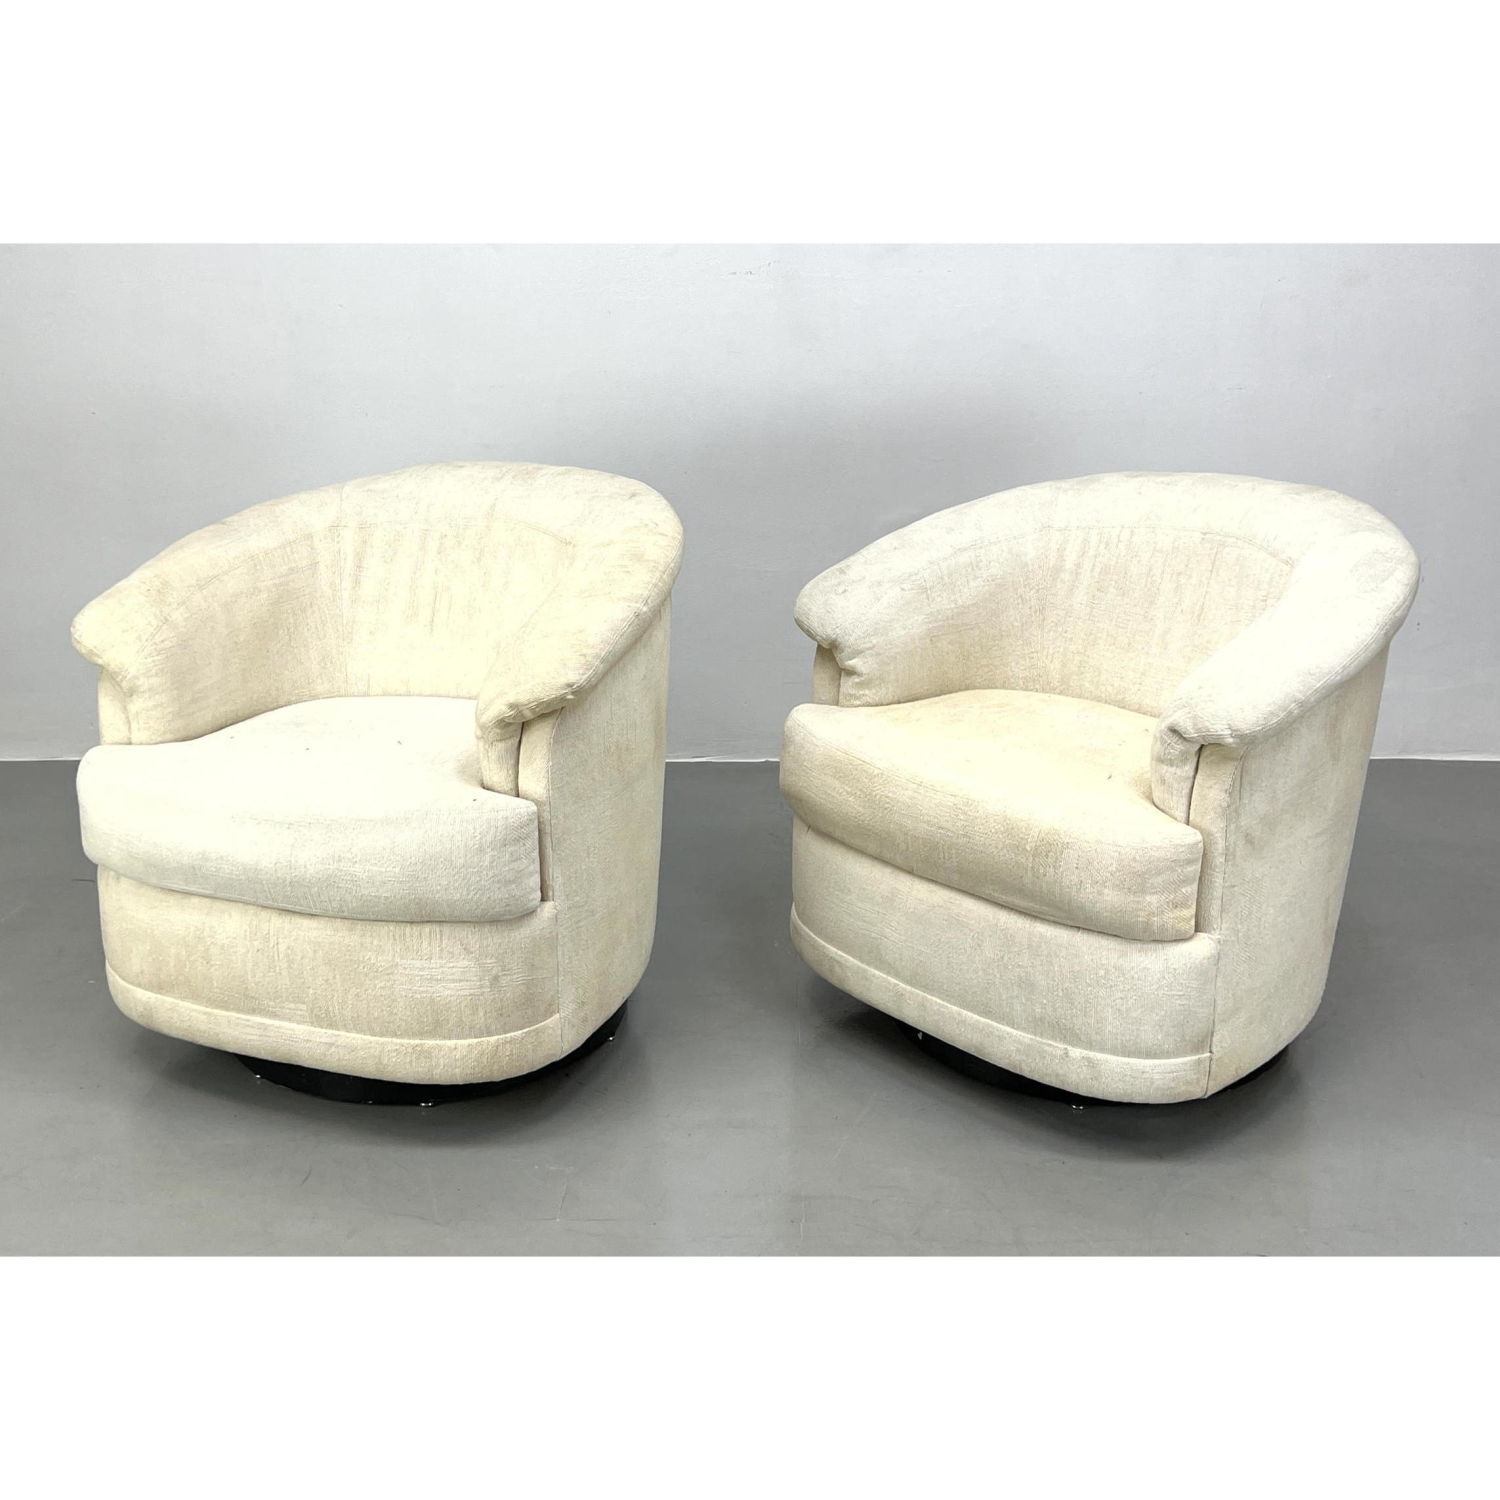 Pair of Swivel chairs. They swivel